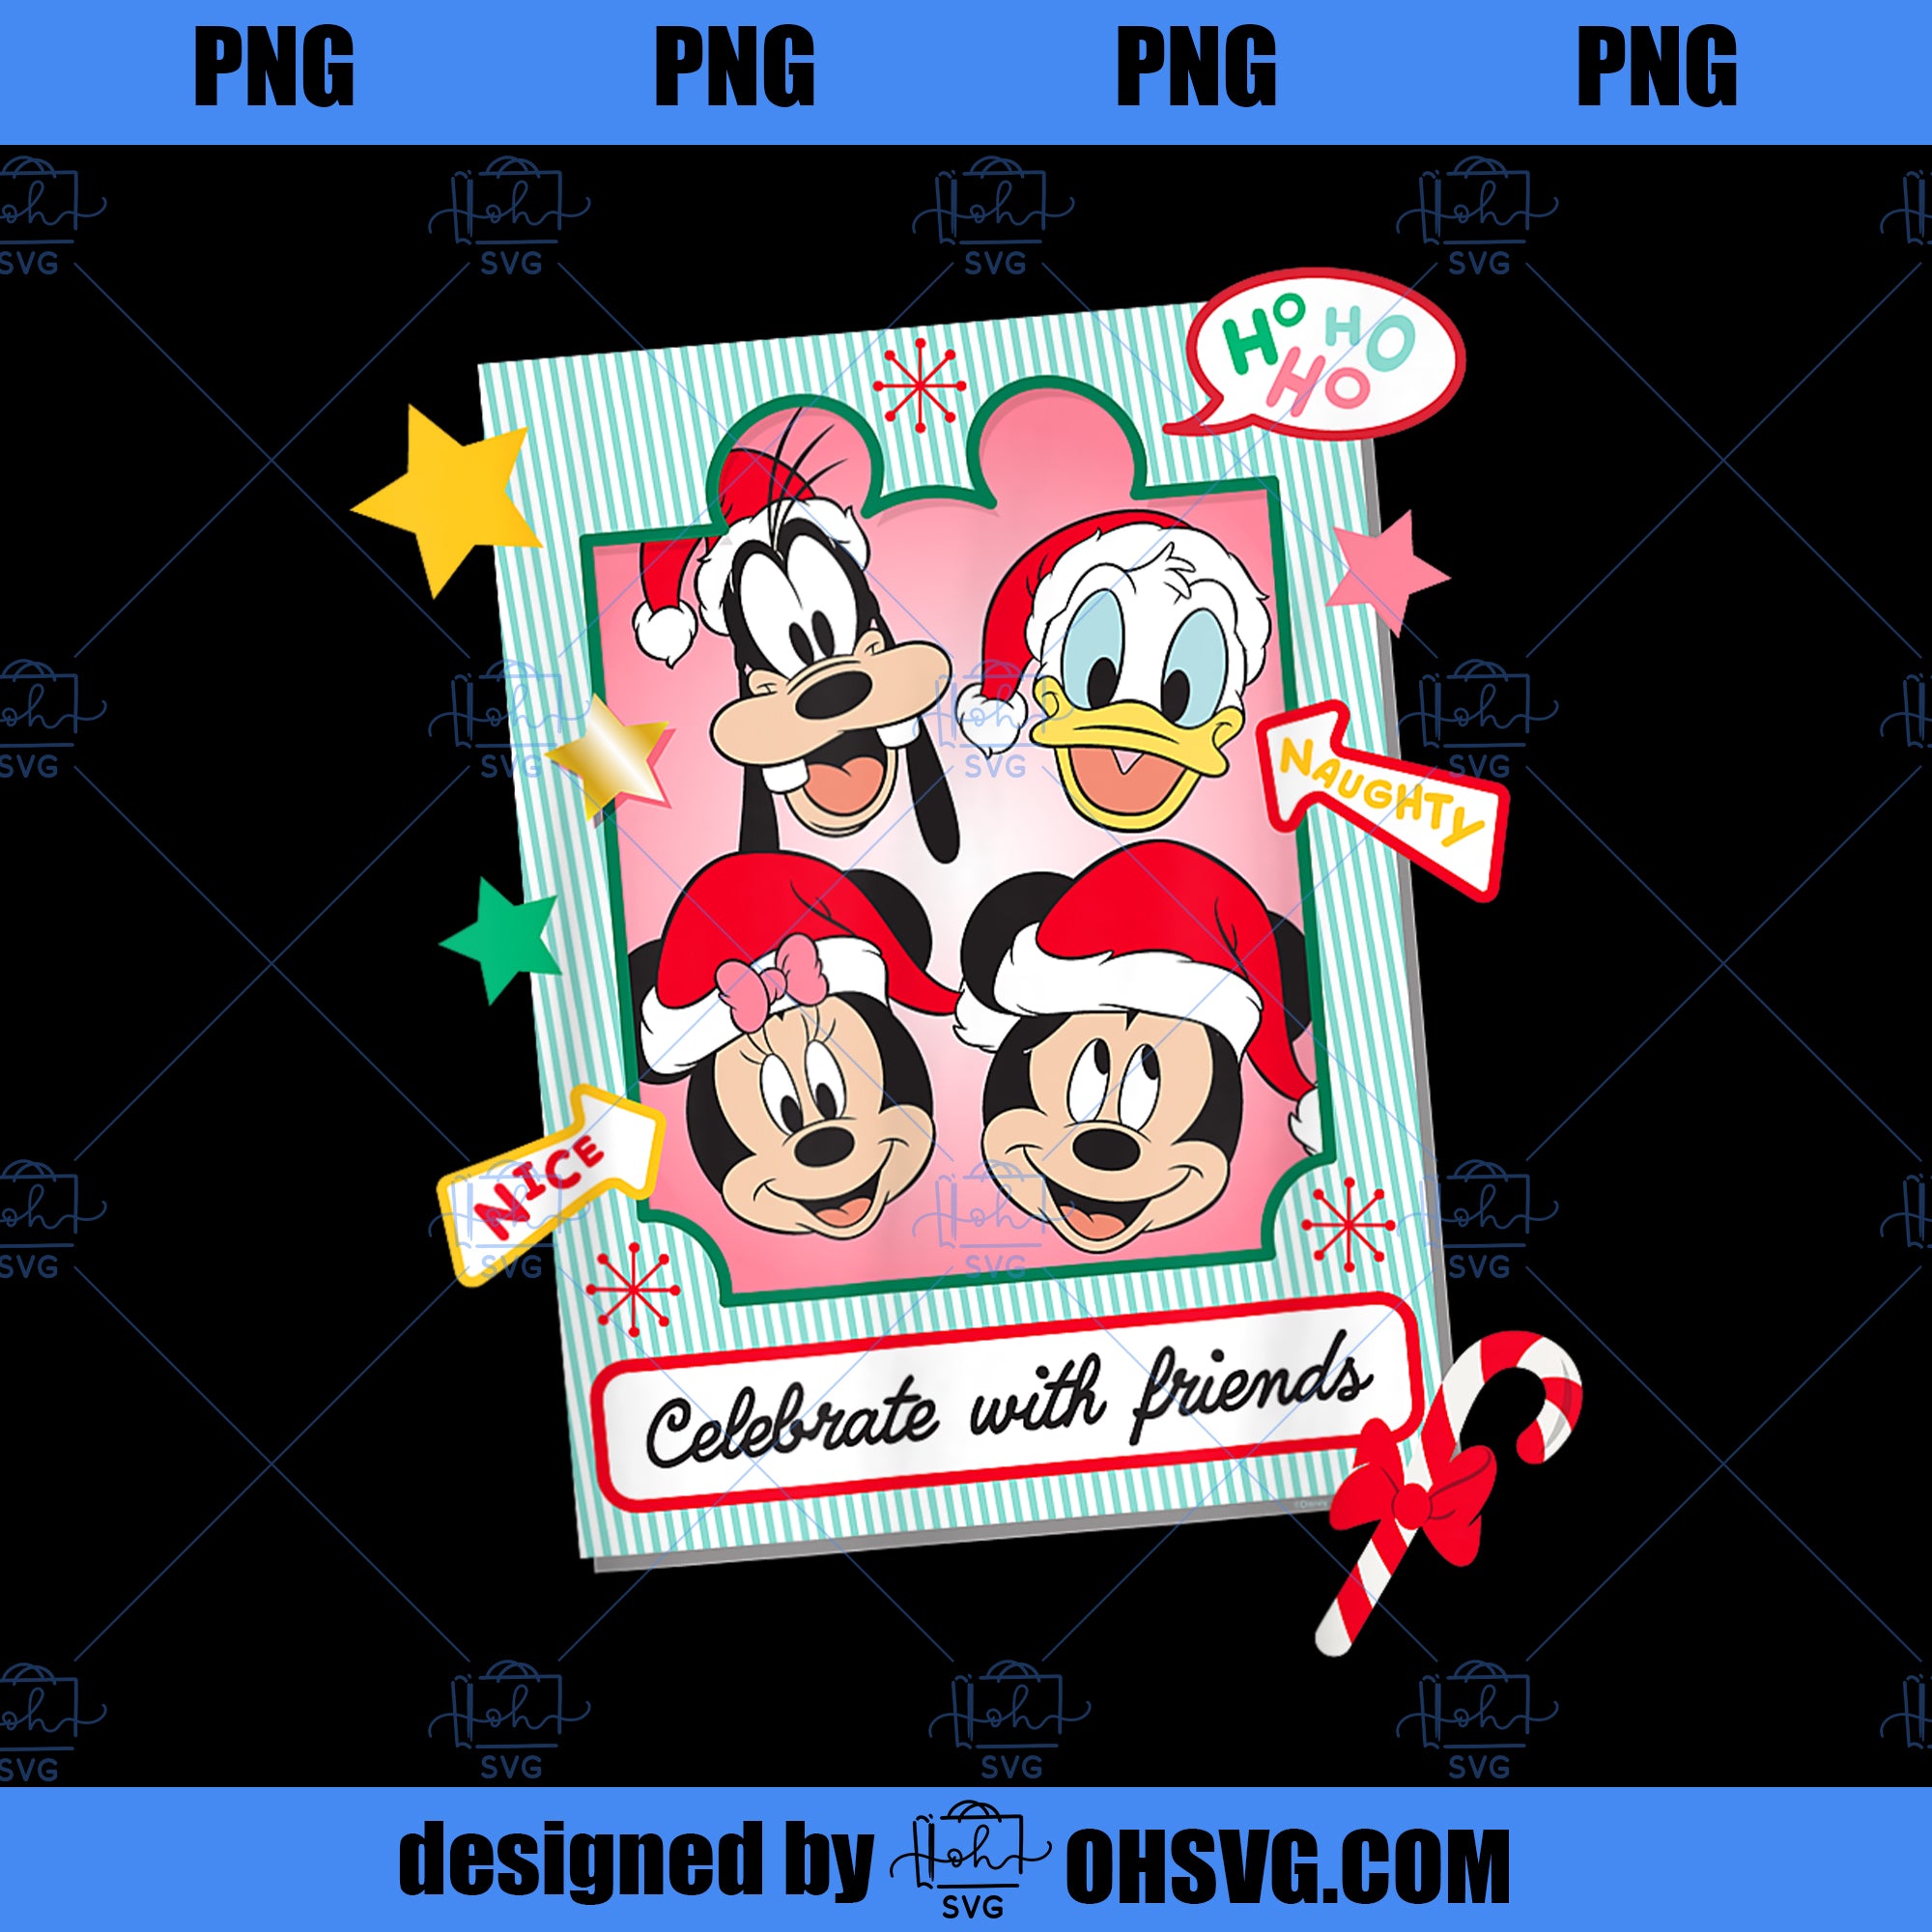 Disney Mickey Mouse Pals Christmas Celebrate with Friends PNG, Disney PNG, Mickey Friends PNG